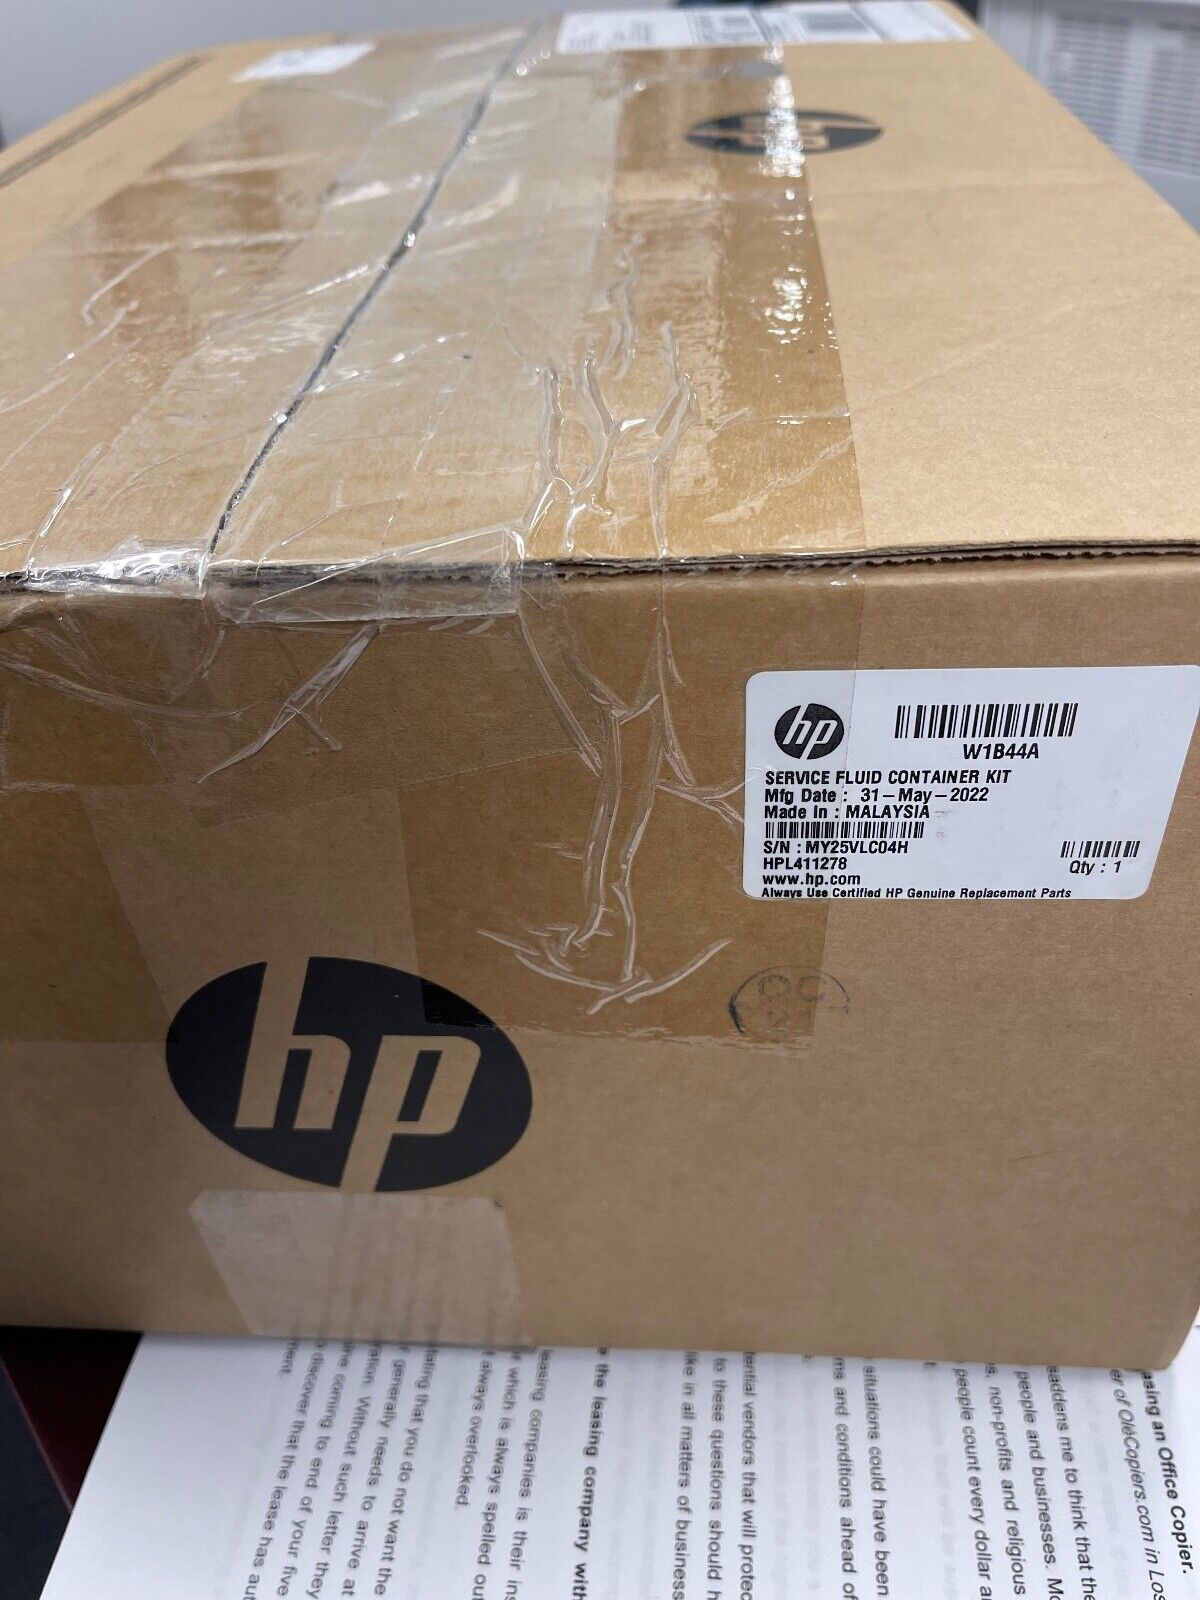 HP W1B44A Service Fluid Container Kit -Open Box, But New